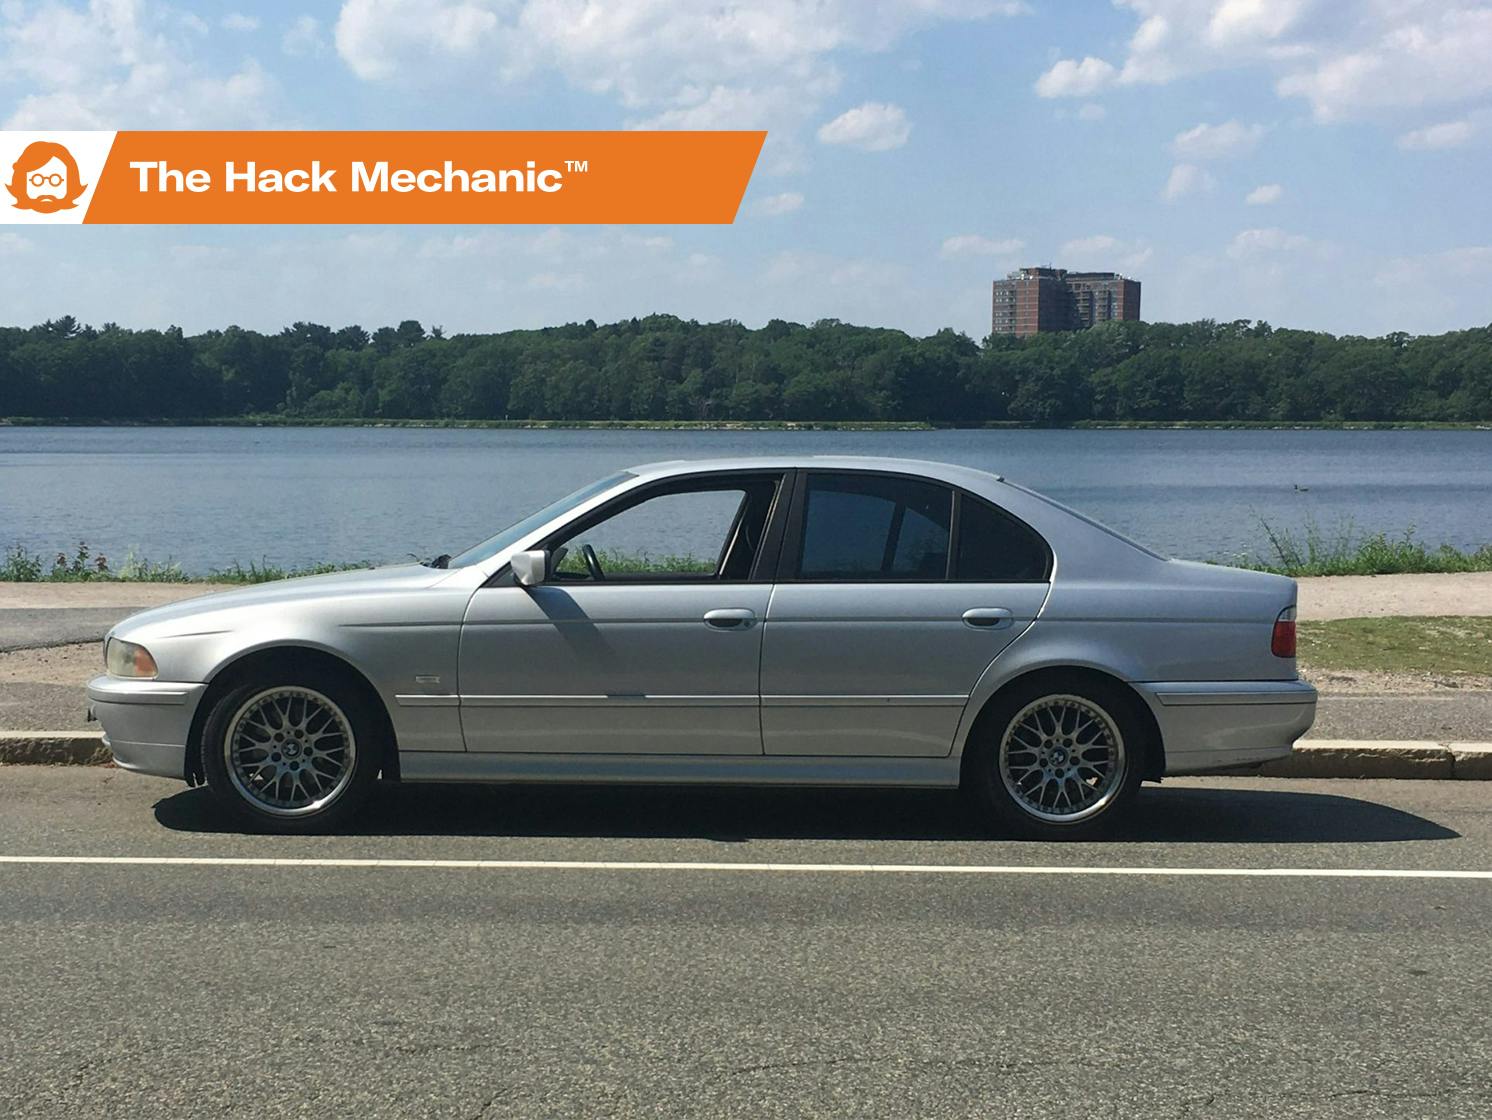 This BMW E39 M5 Is Well On Its Way To Half A Million Miles • Petrolicious